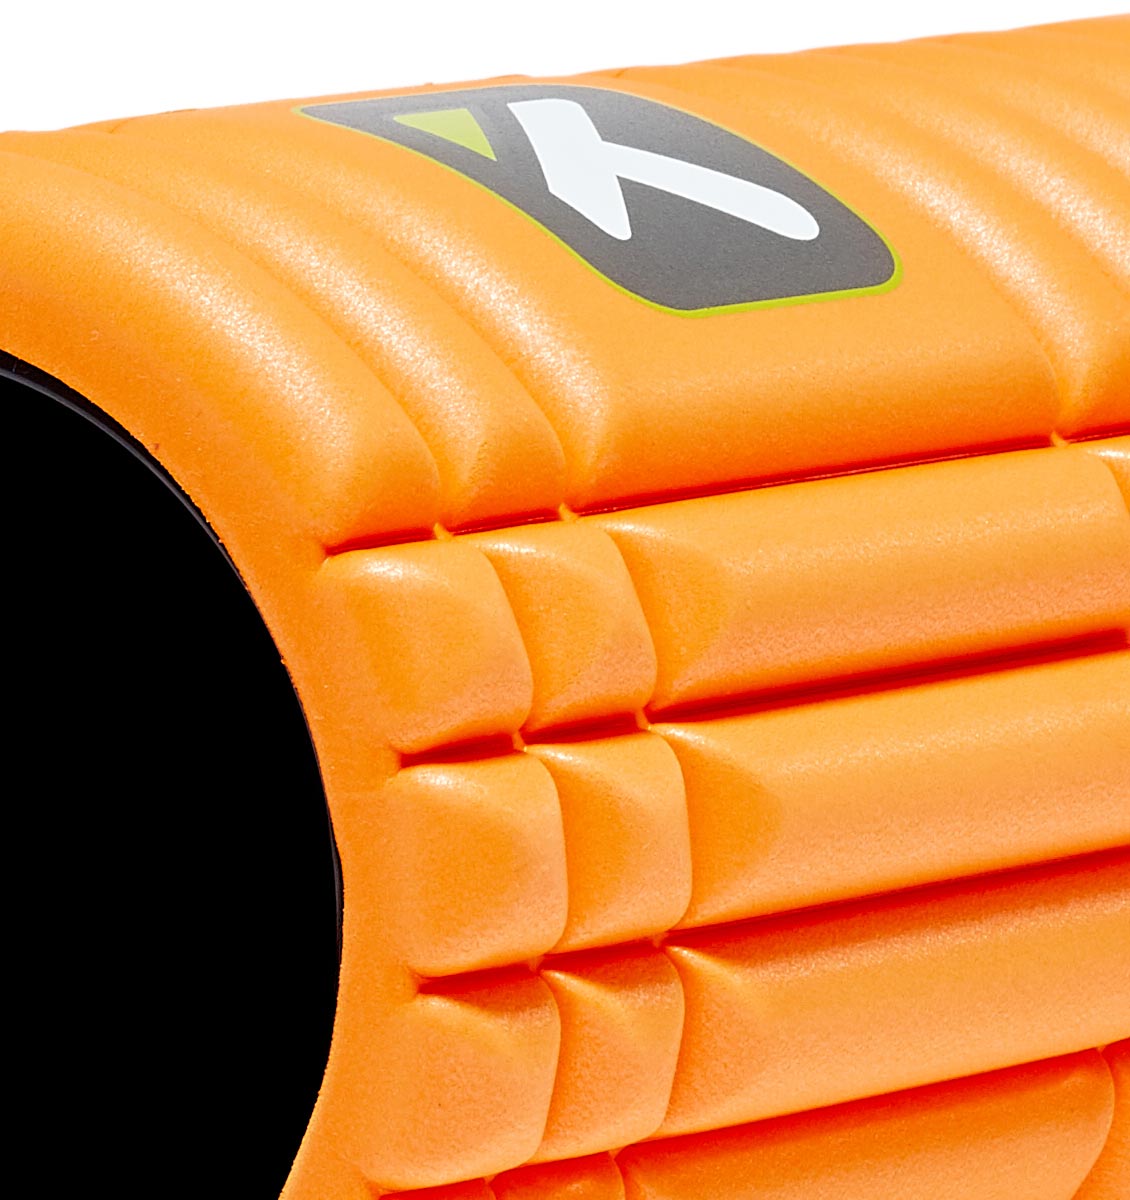 TPT3GRDOWS00000 TriggerPoint The Grid 1.0 Foam Roller Orange - 45 Degree Angle - Close Up